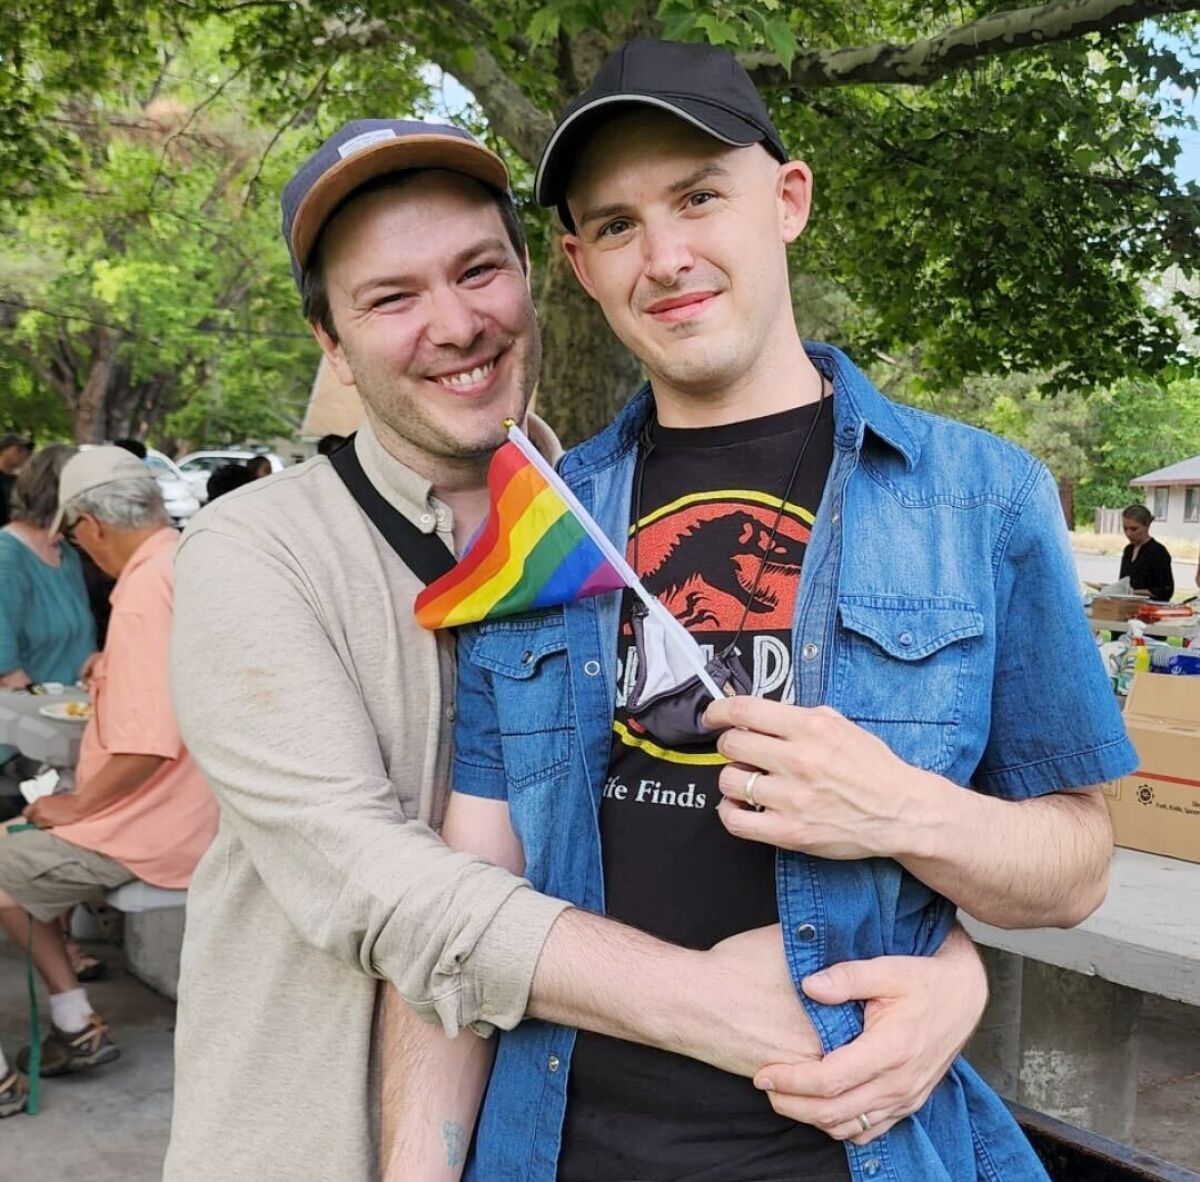 Two men are smiling and holding a mini rainbow flag